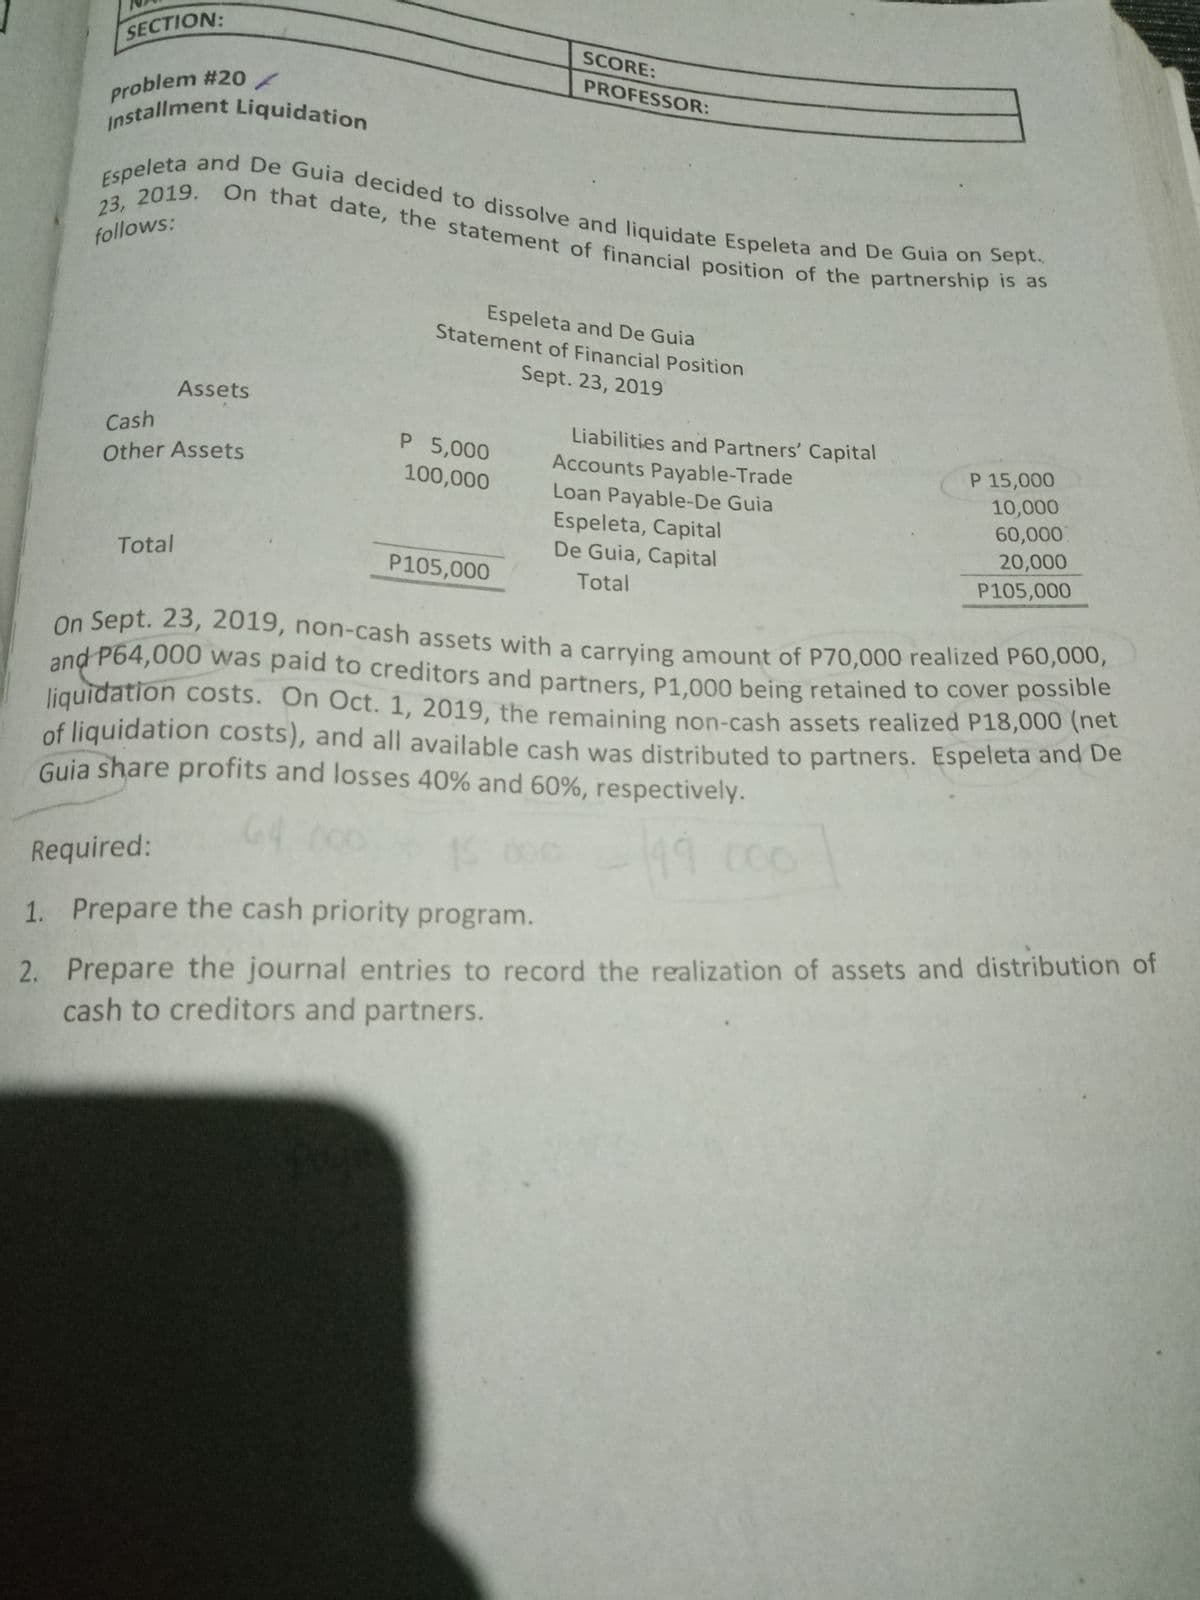 problem #20/
and P64,000 was paid to creditors and partners, P1,000 being retained to cover possible
23, 2019. On that date, the statement of financial position of the partnership is as
Espeleta and De Guia decided to dissolve and liquidate Espeleta and De Guia on Sept.
Installment Liquidation
On Sept. 23, 2019, non-cash assets with a carrying amount of P70,000 realized P60,000,
SECTION:
SCORE:
PROFESSOR:
23, 2019.
follows:
Espeleta and De Guia
Statement of Financial Position
Sept. 23, 2019
Assets
Liabilities and Partners' Capital
Accounts Payable-Trade
Loan Payable-De Guia
Espeleta, Capital
De Guia, Capital
Cash
P 5,000
P 15,000
10,000
60,000
20,000
Other Assets
100,000
Total
P105,000
Total
P105,000
On Sept. 23, 2019, non-cash assets with a carrving amount of P70,000 realized P60,000,
and P64,000 was paid to creditors and partners, P1.000 being retained to cover possIble
liquidation costs. On Oct. 1, 2019, the remaining non-cash assets realized P18,000 (net
of liquidation costs), and all available cash was distributed to partners. Espeleta and De
Guia share profits and losses 40% and 60%, respectively.
64.00
149.000
Required:
1. Prepare the cash priority program.
2. Prepare the journal entries to record the realization of assets and distribution of
cash to creditors and partners.
